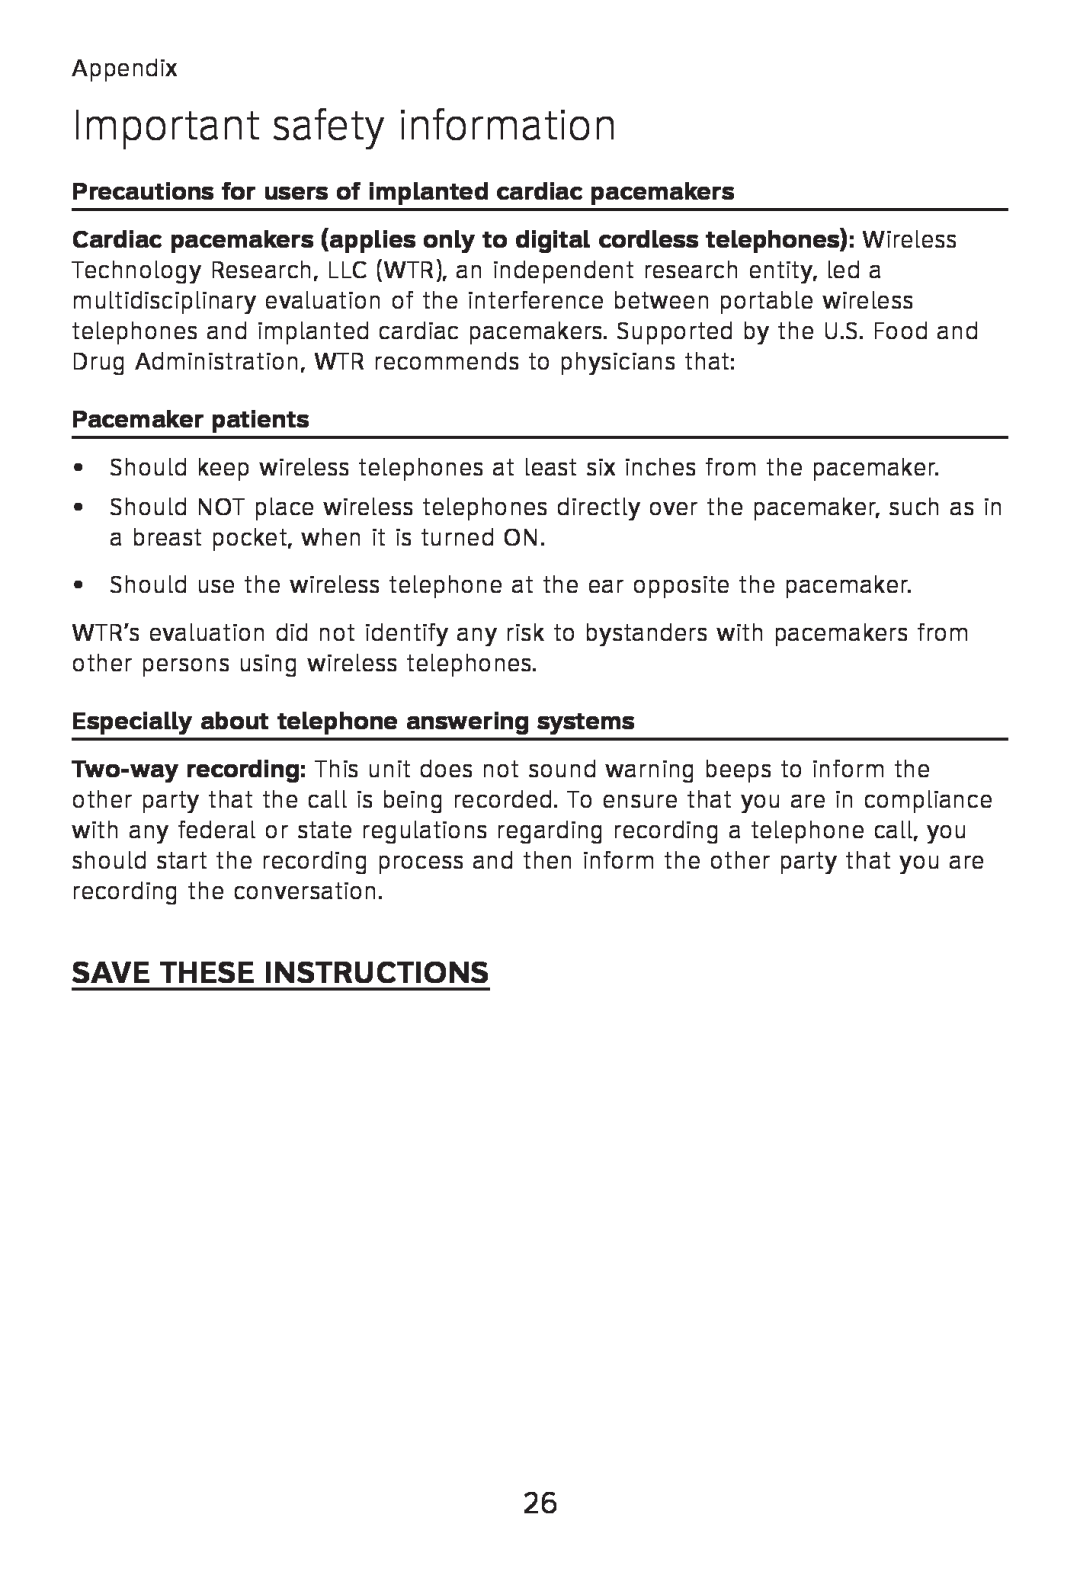 AT&T TL32200 Save These Instructions, Important safety information, Precautions for users of implanted cardiac pacemakers 